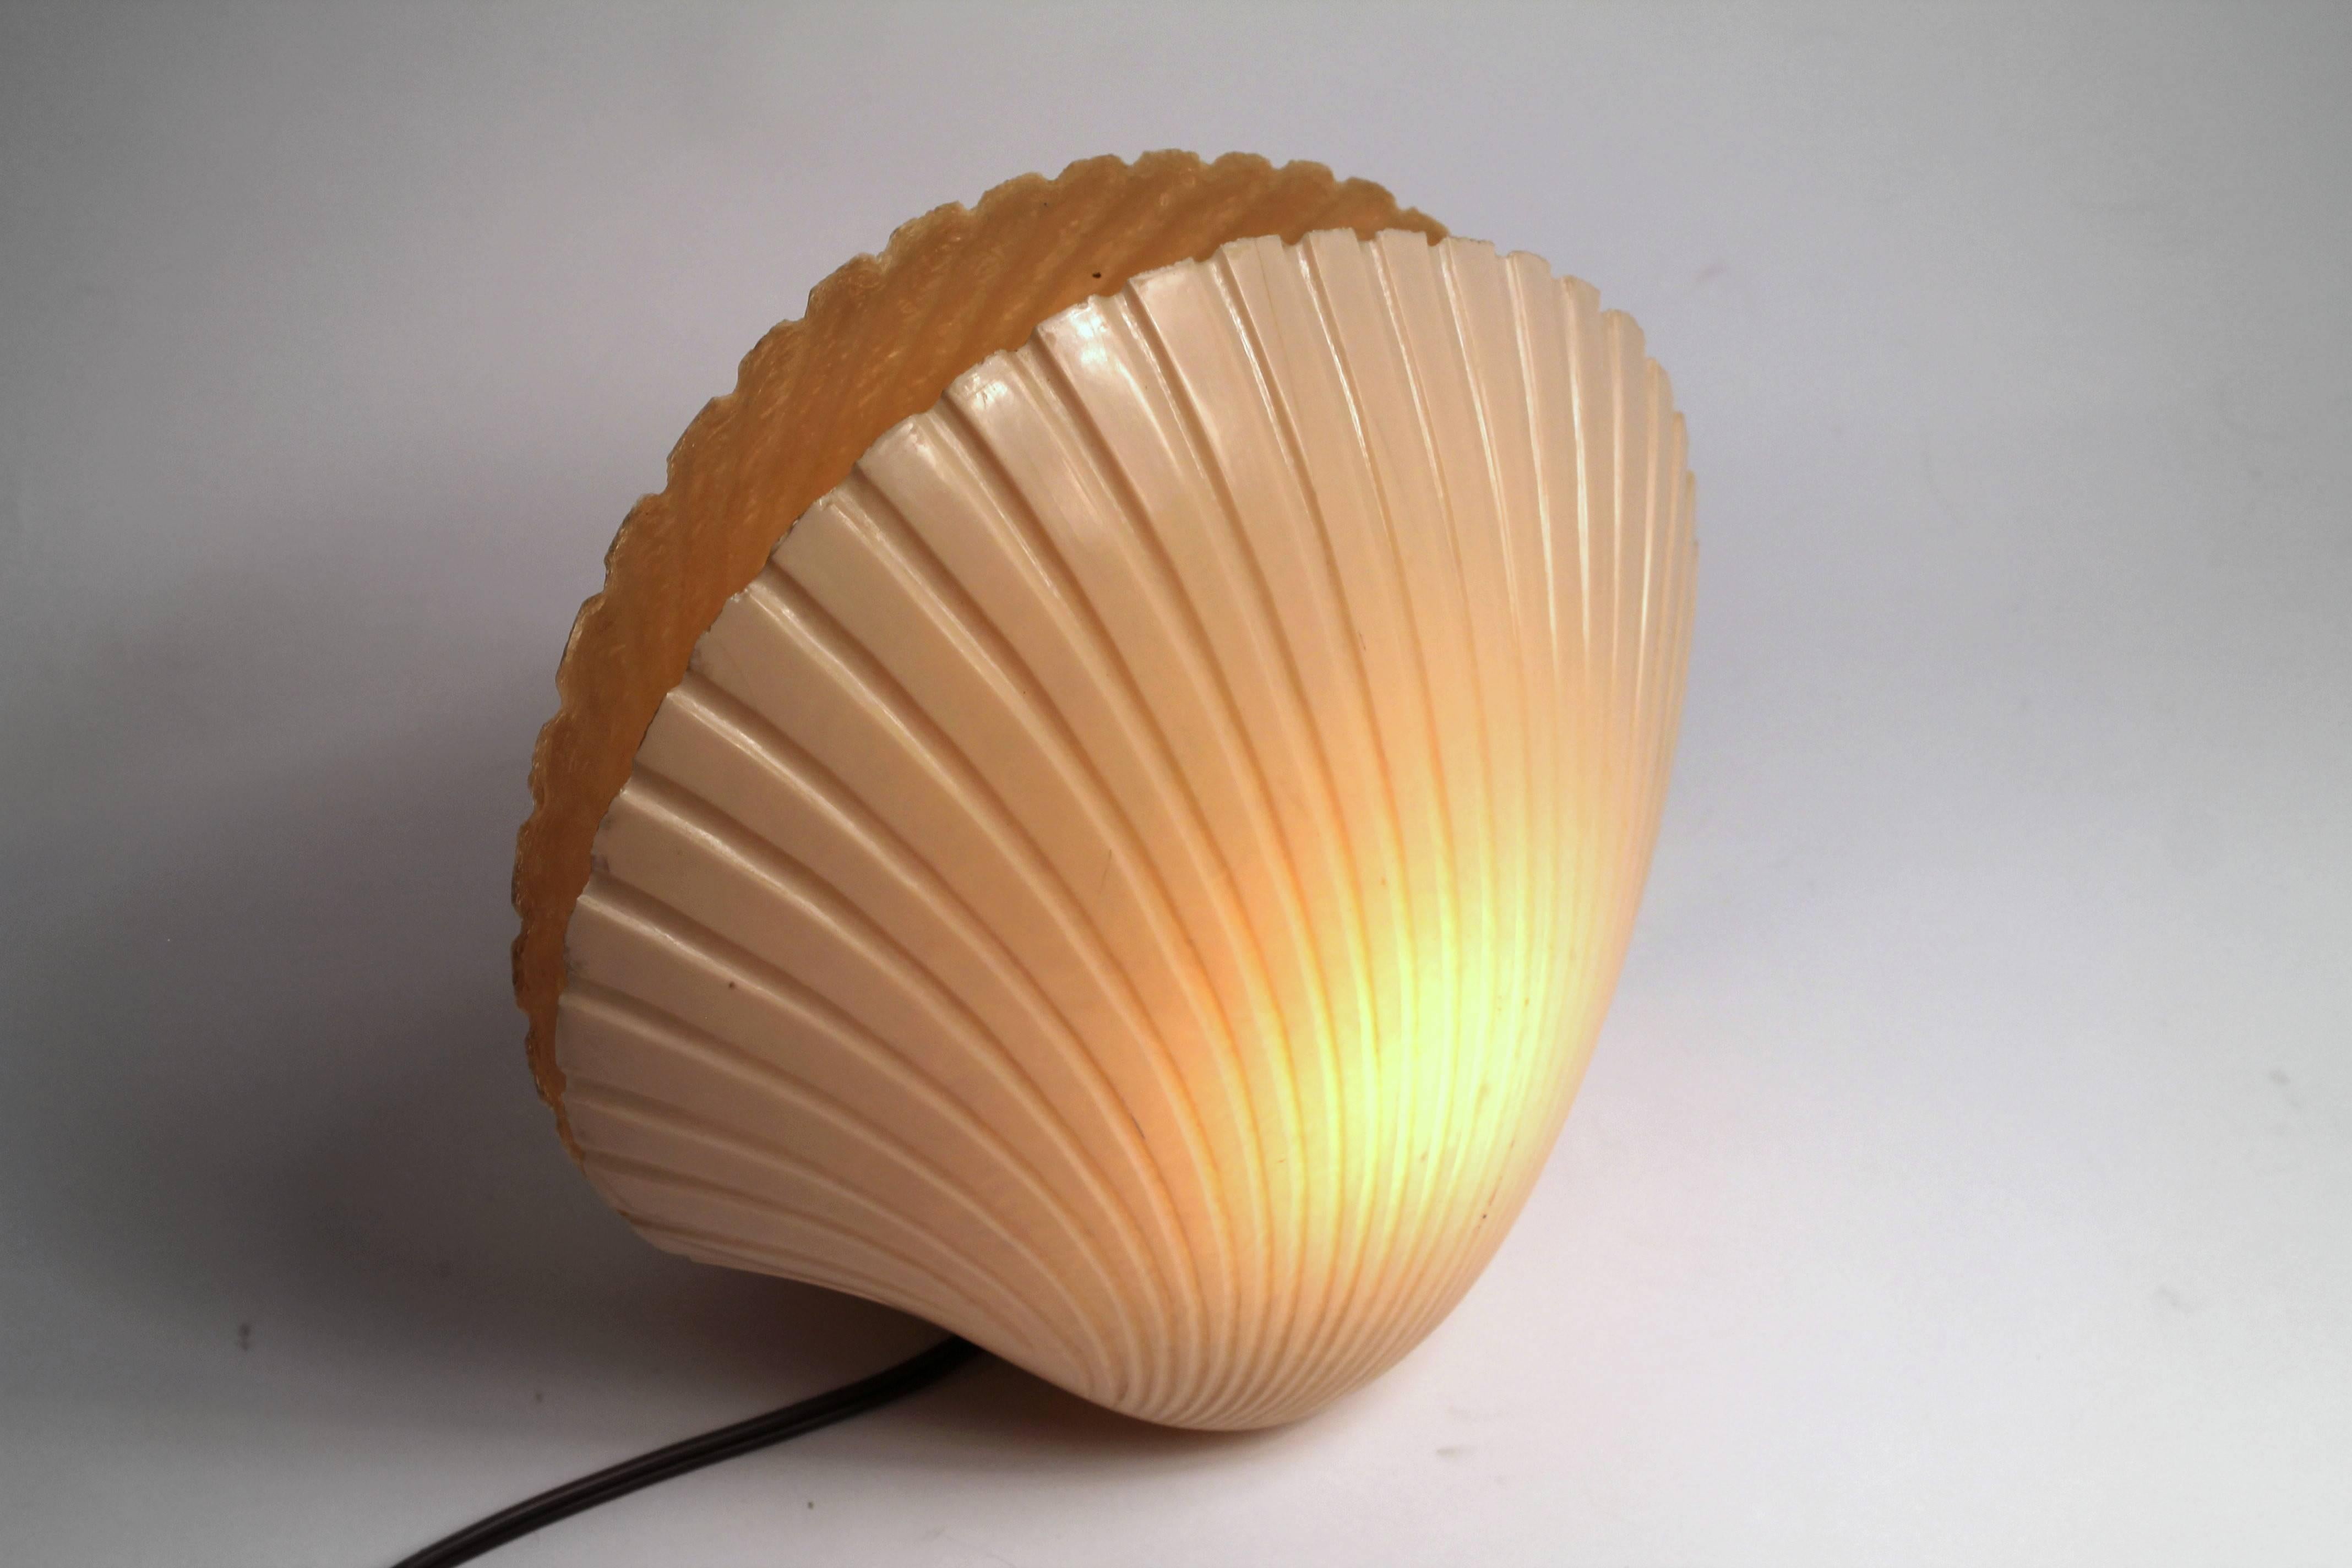 Late 20th Century Andre Cazenave Fiberglass Shell Table Lamp for Atelier A France Vintage, 1970s